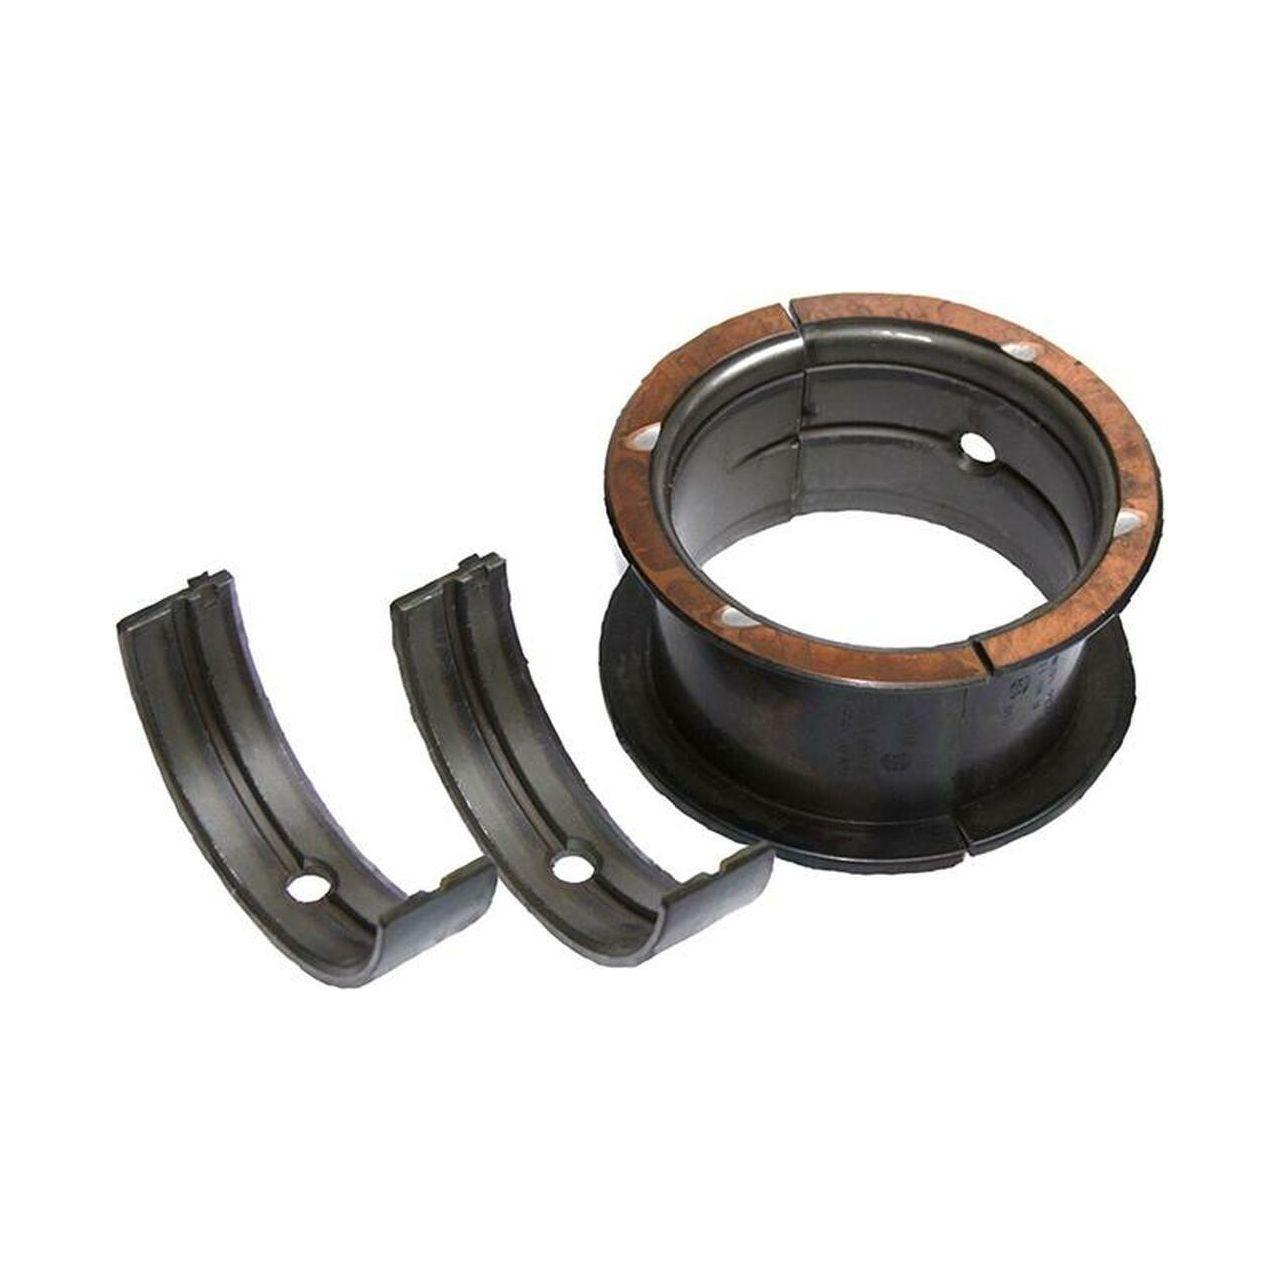 ACL Toyota/Lexus 2JZGE/2JZGTE 3.0L 0.25 Oversized High Performance Rod Bearing Set - SMINKpower Performance Parts ACL6B8100H-.25 ACL